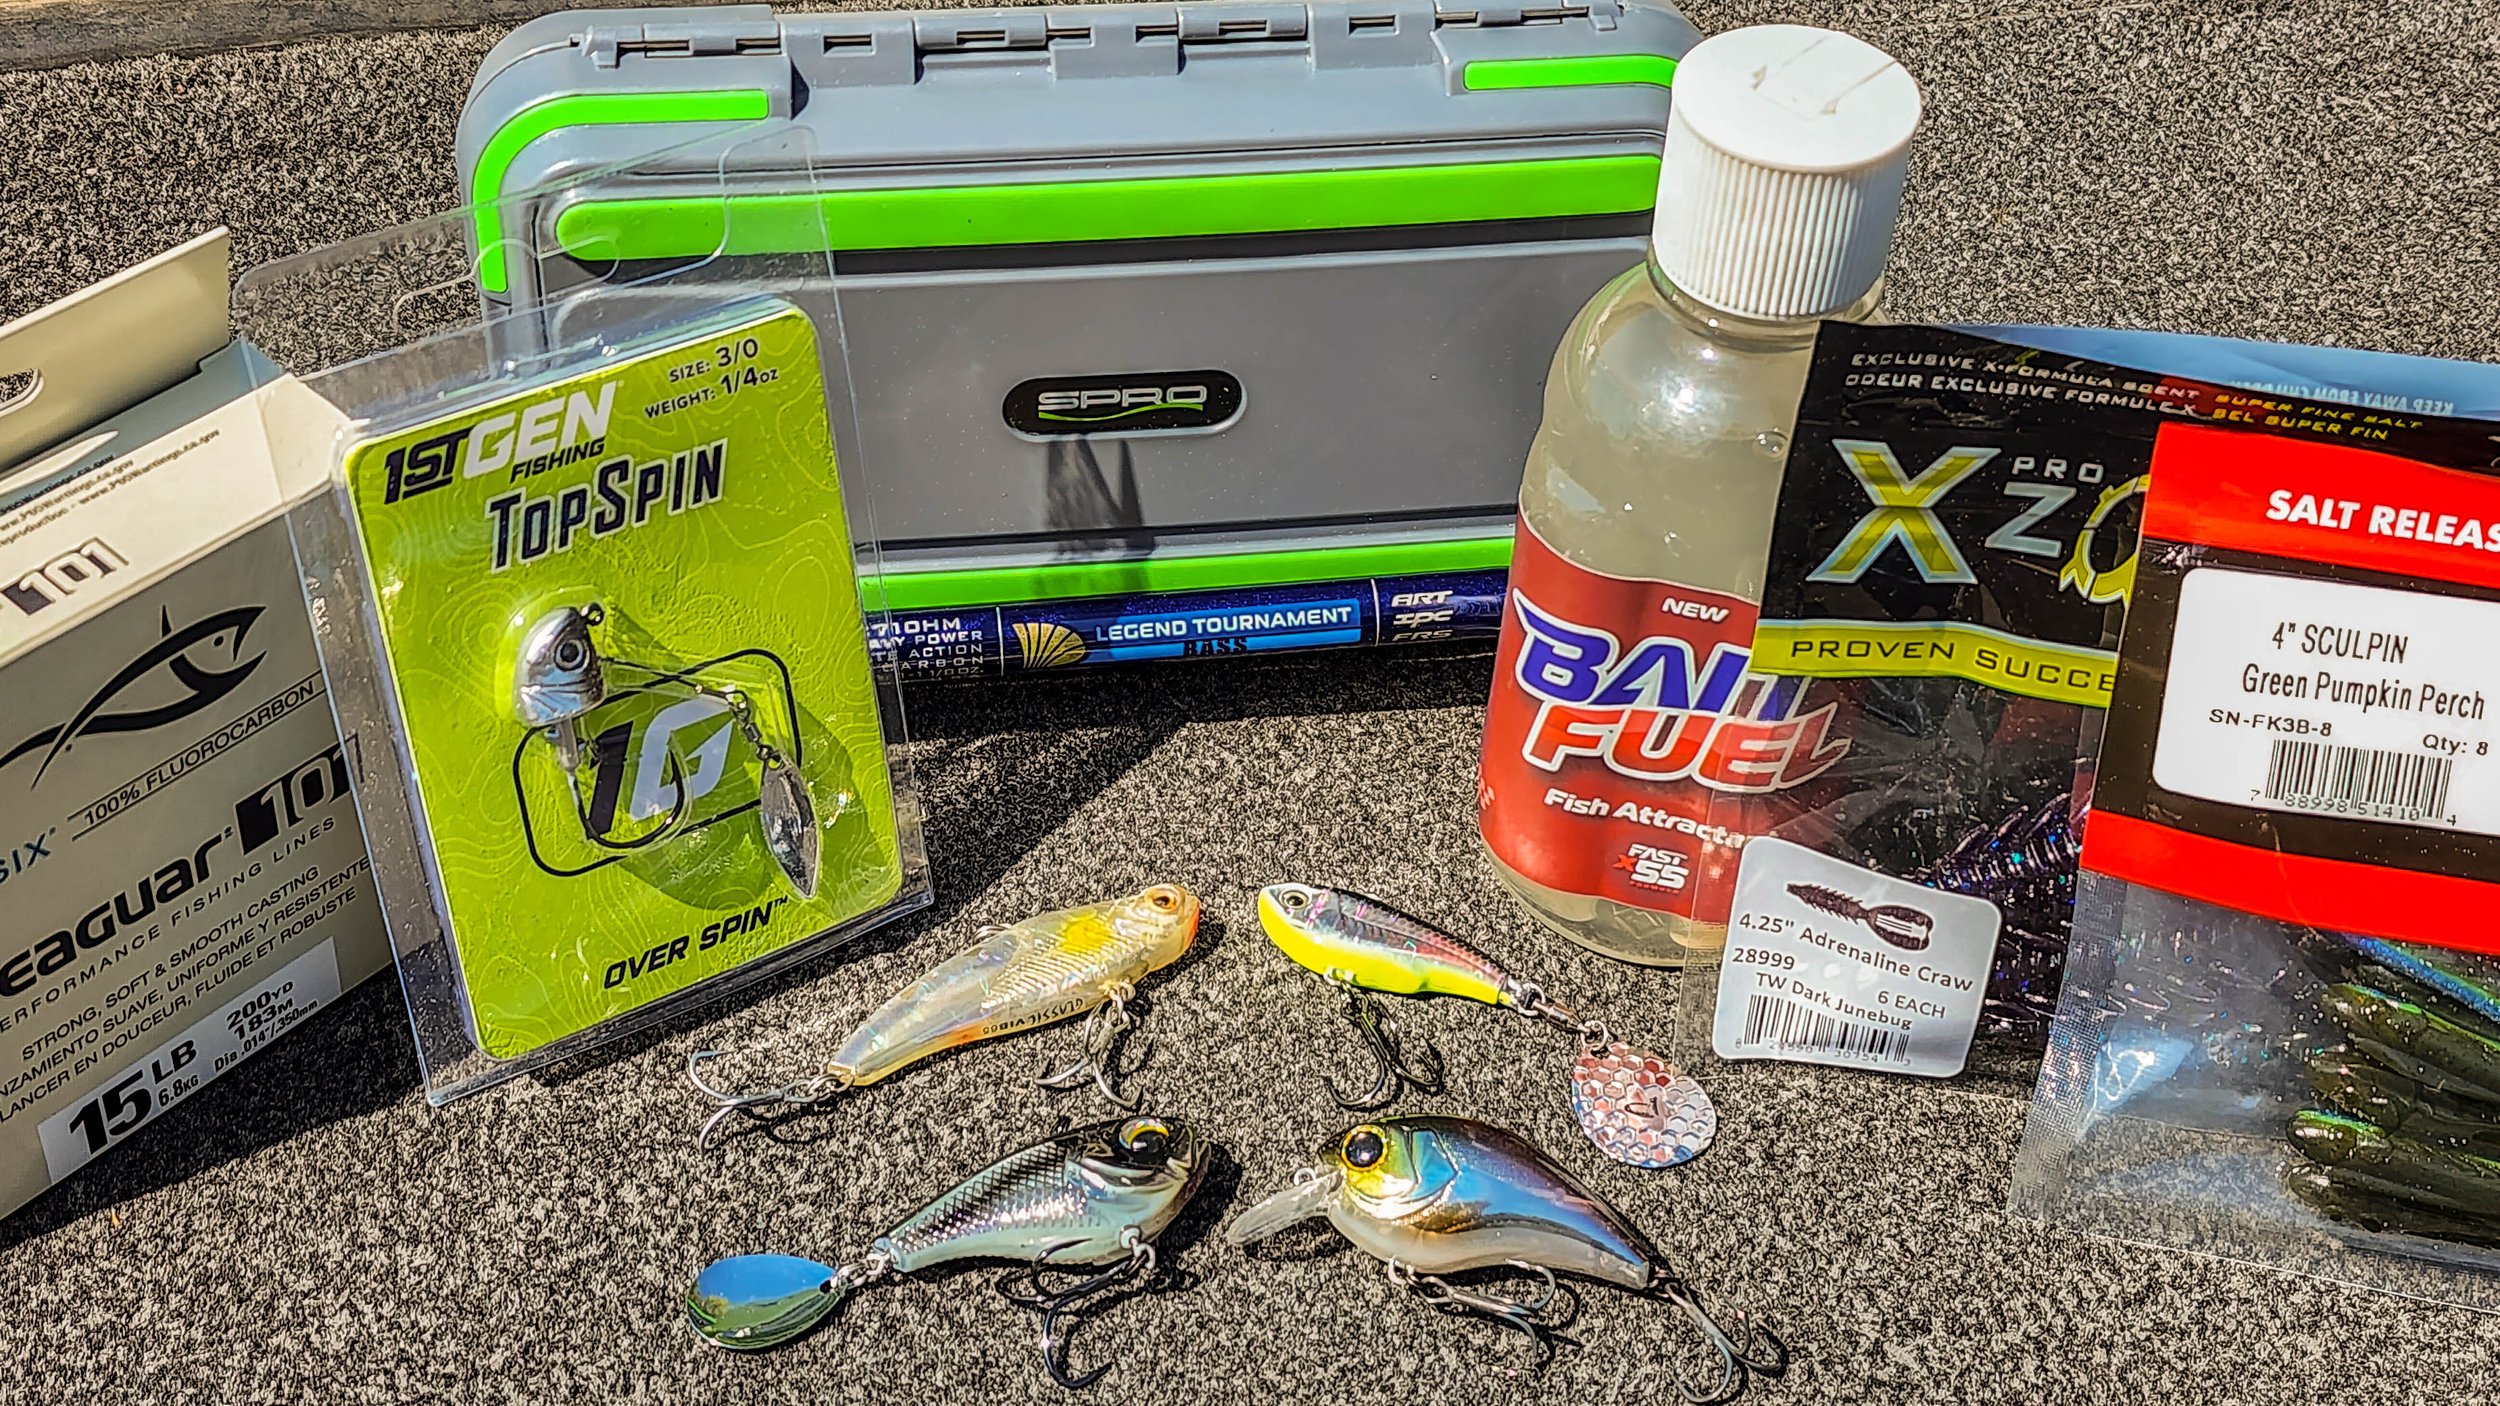 Bass Fishing Gear Review! The Hottest New Baits, Hooks, And Gear! —  Tactical Bassin' - Bass Fishing Blog